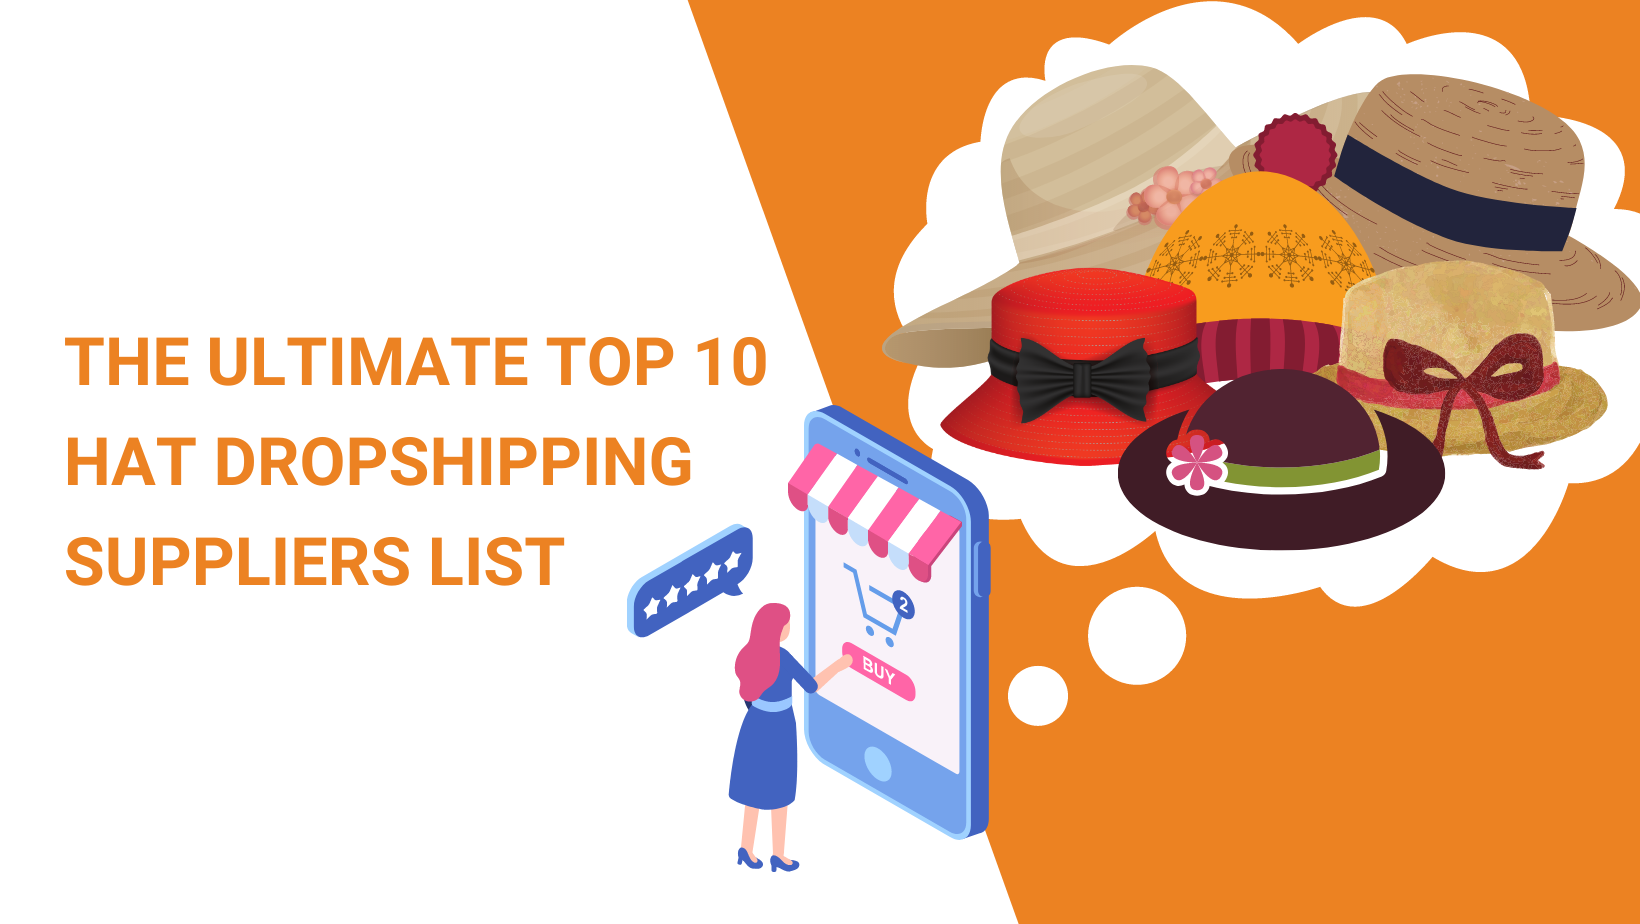 THE ULTIMATE TOP 10 HAT DROPSHIPPING SUPPLIERS LIST